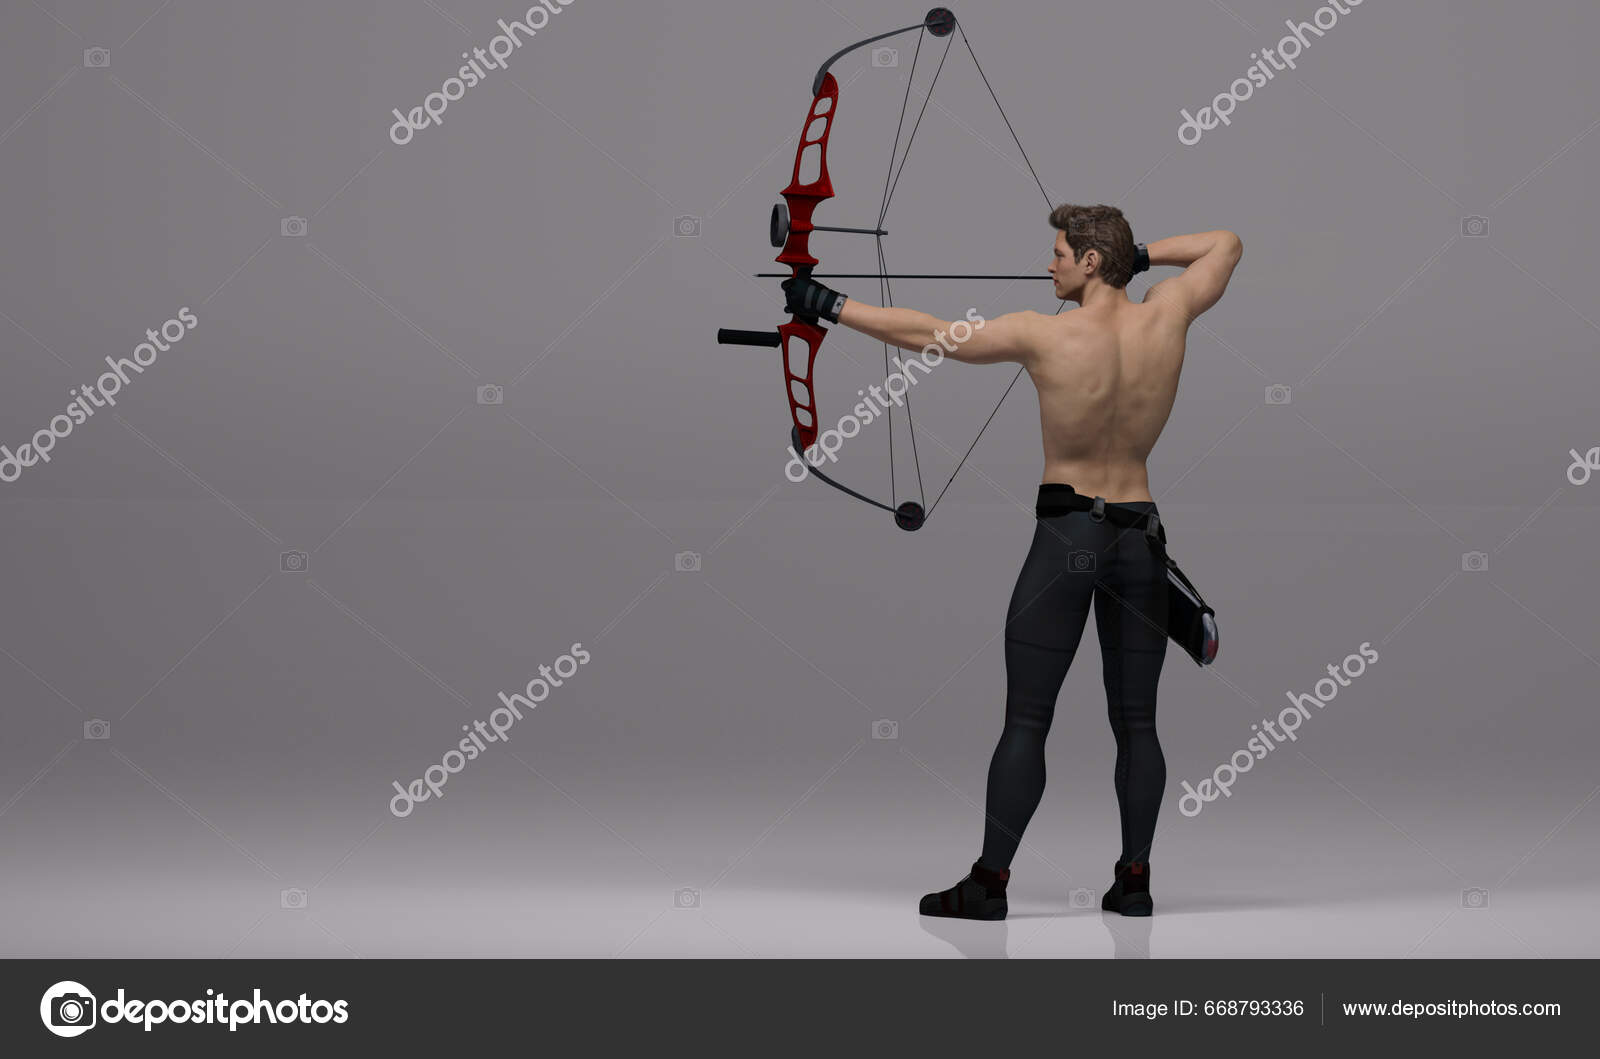 Pin by Girl.pro on Bow | Archery poses, Archer pose, Archery photography